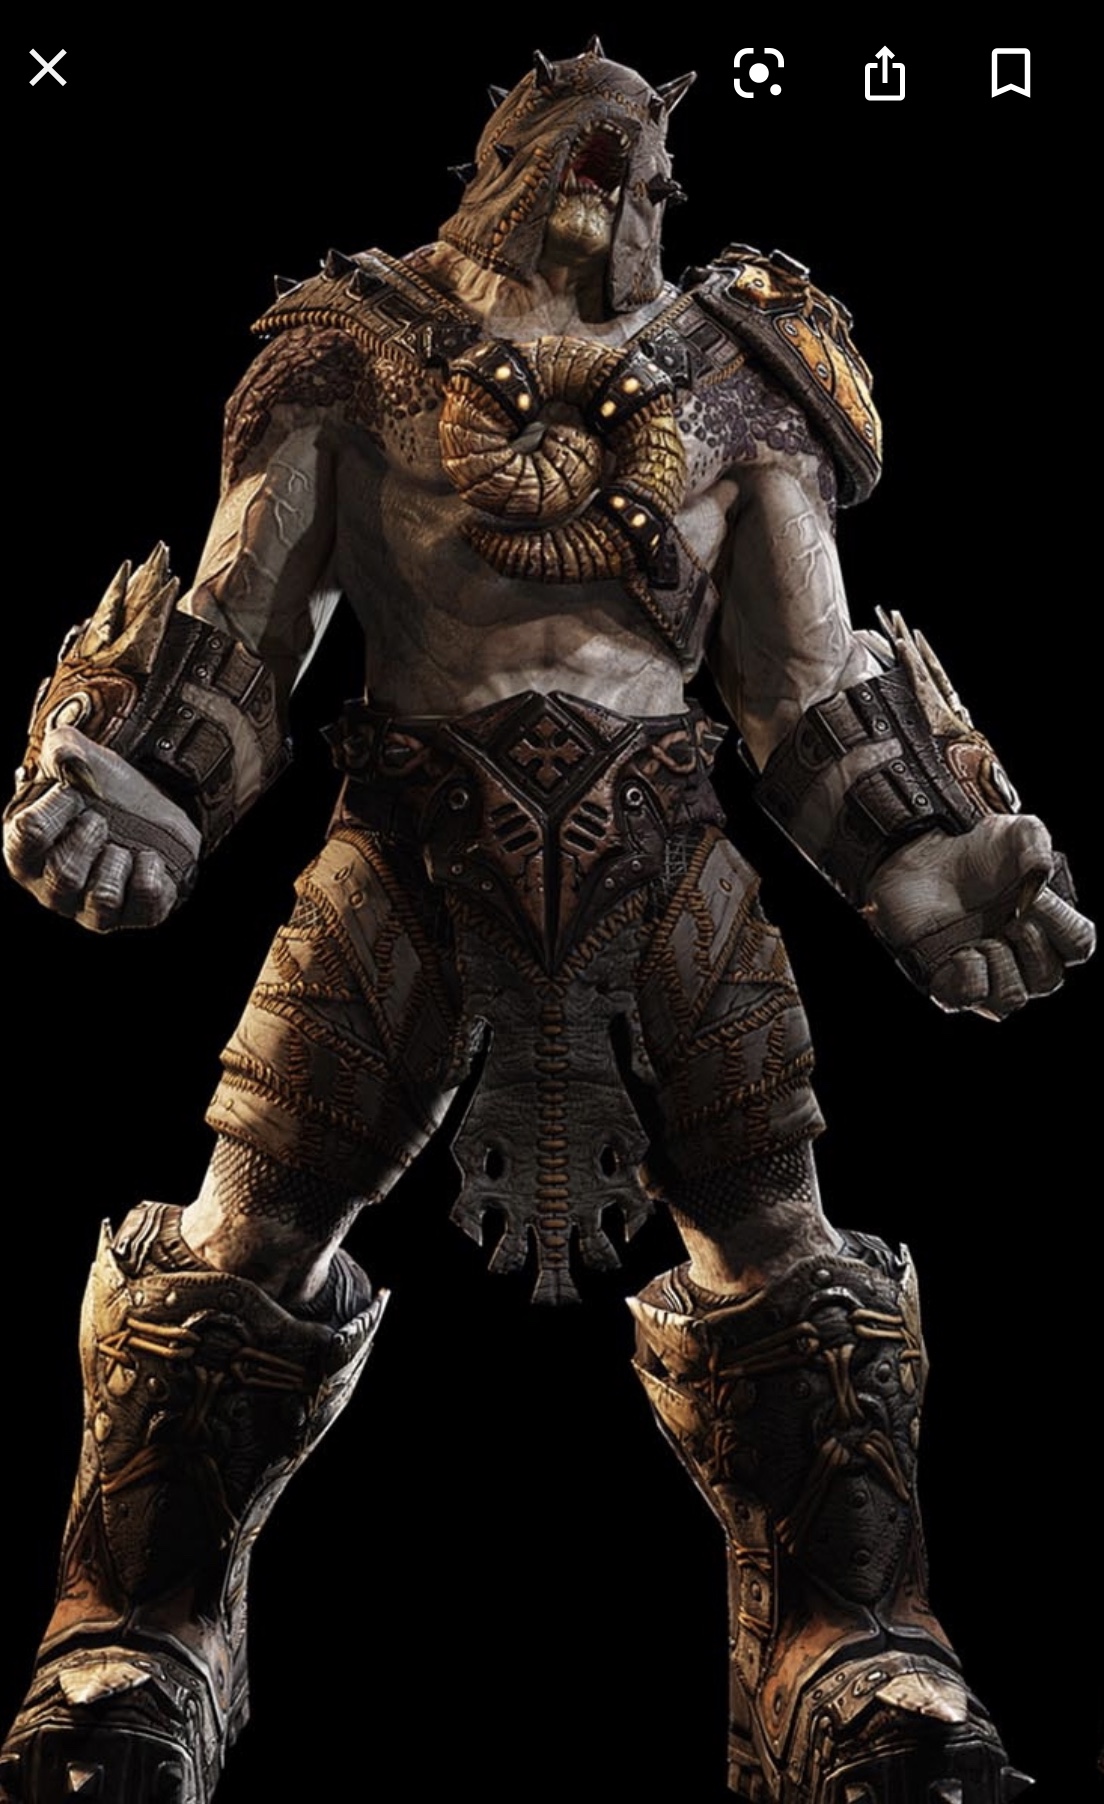 How come the swarm didnt get their classic gears 4 skins 